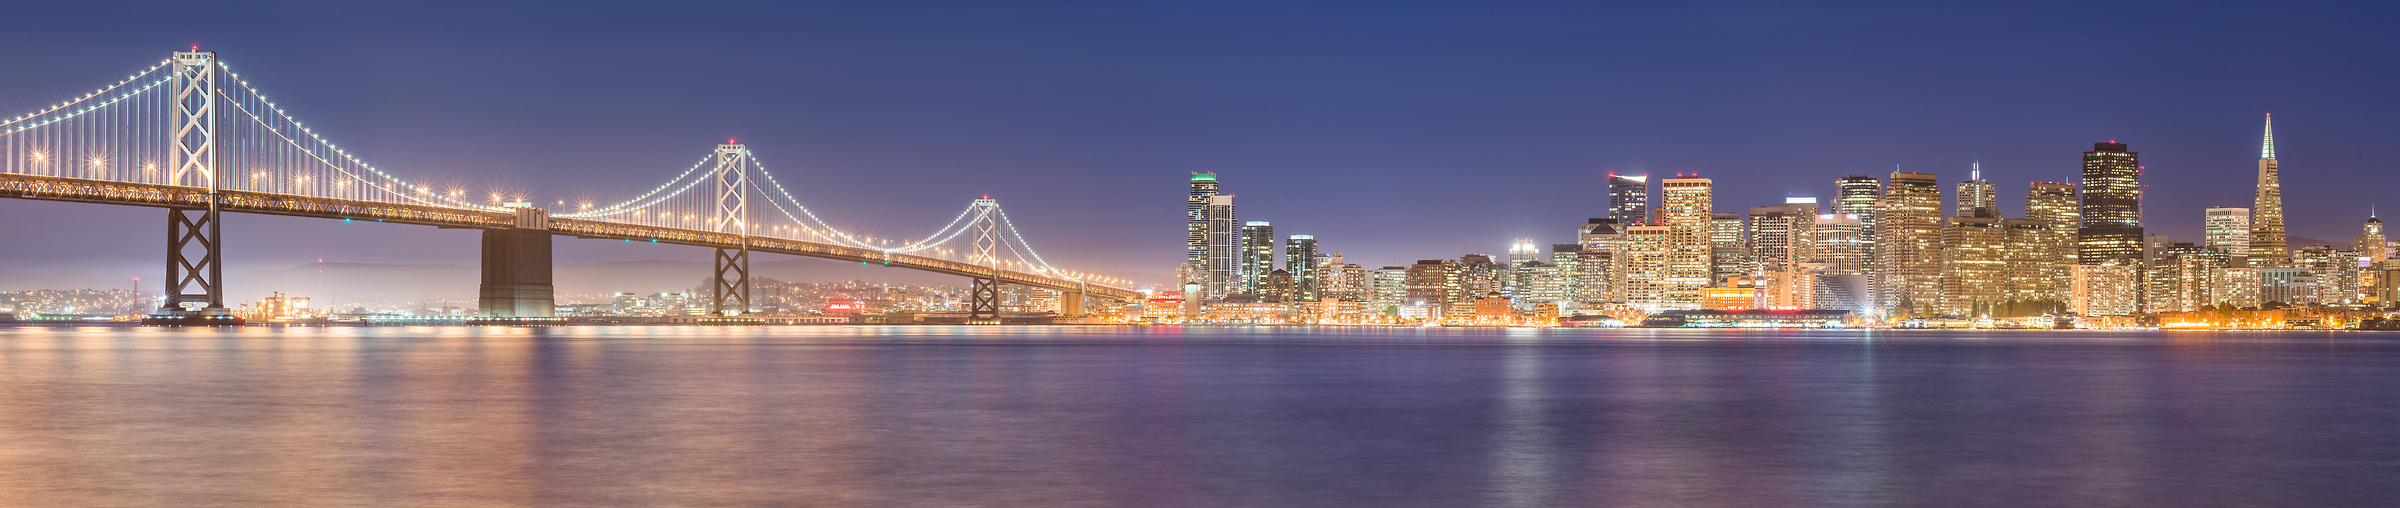 112 megapixels! A very high resolution, large-format VAST photo print of the San Francisco skyline in California at at night; cityscape photo created by Justin Katz.